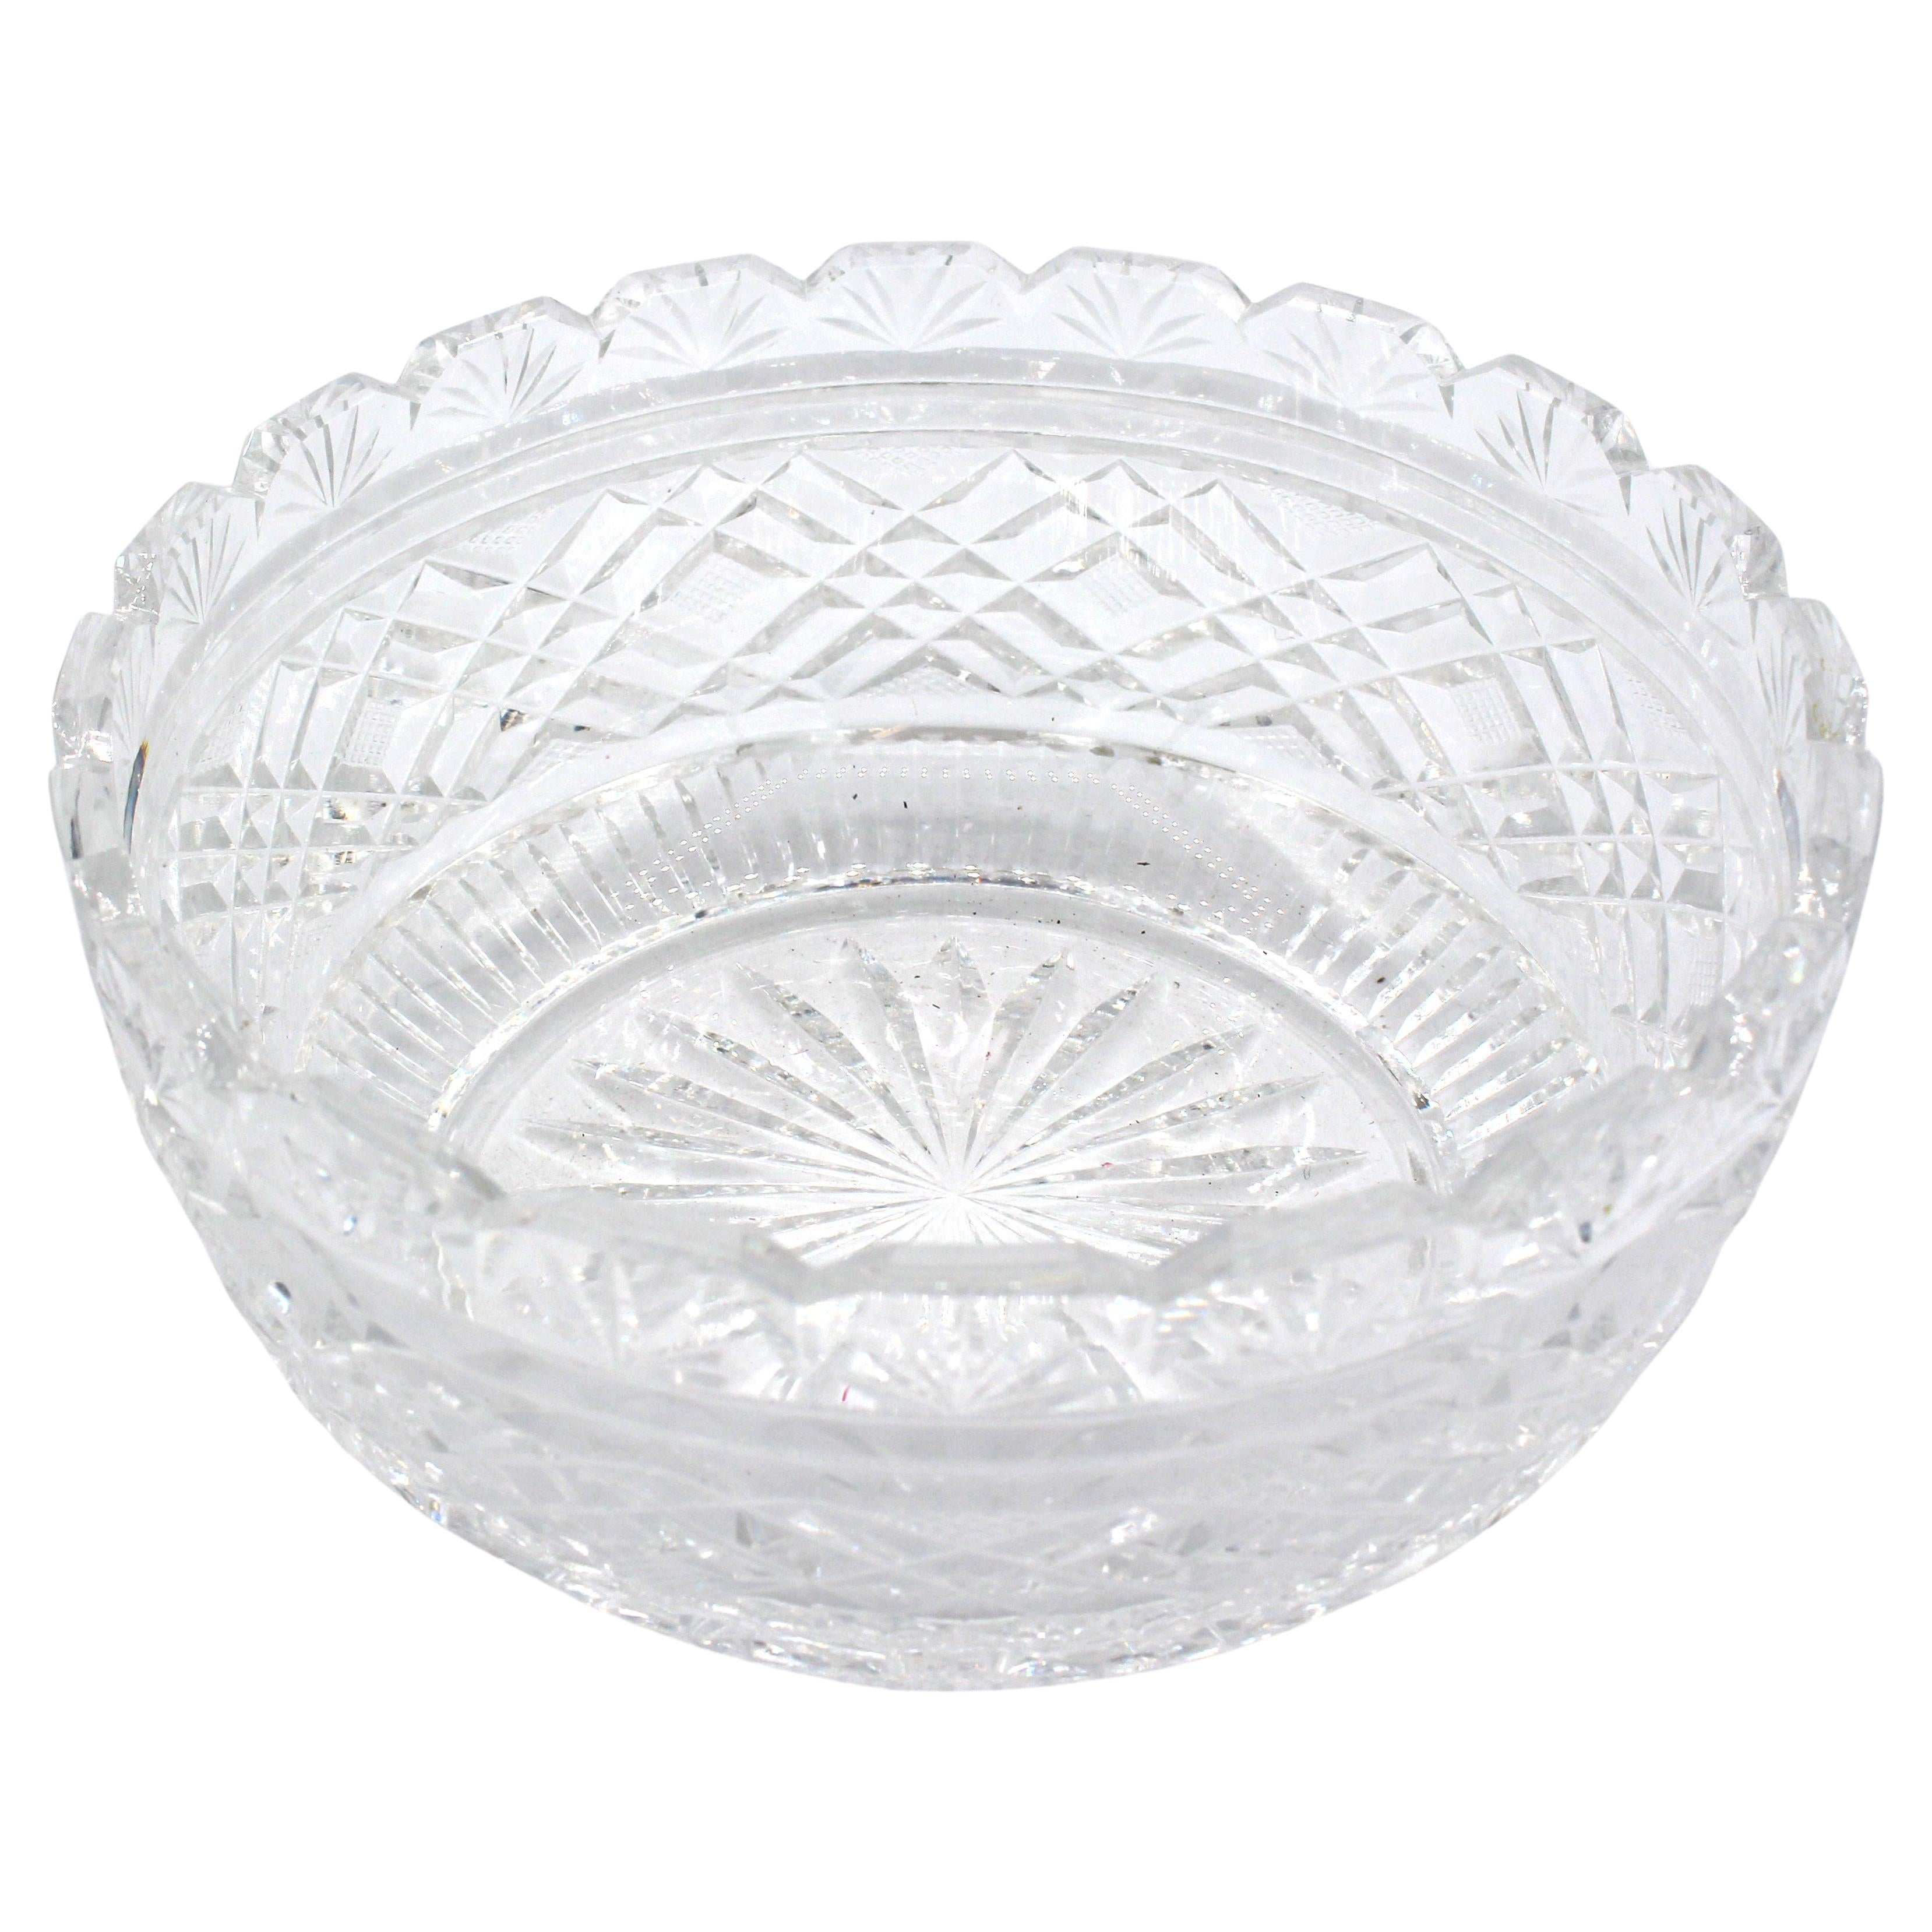 Late 19th to Early 20th Century English Cut Glass Fruit Bowl